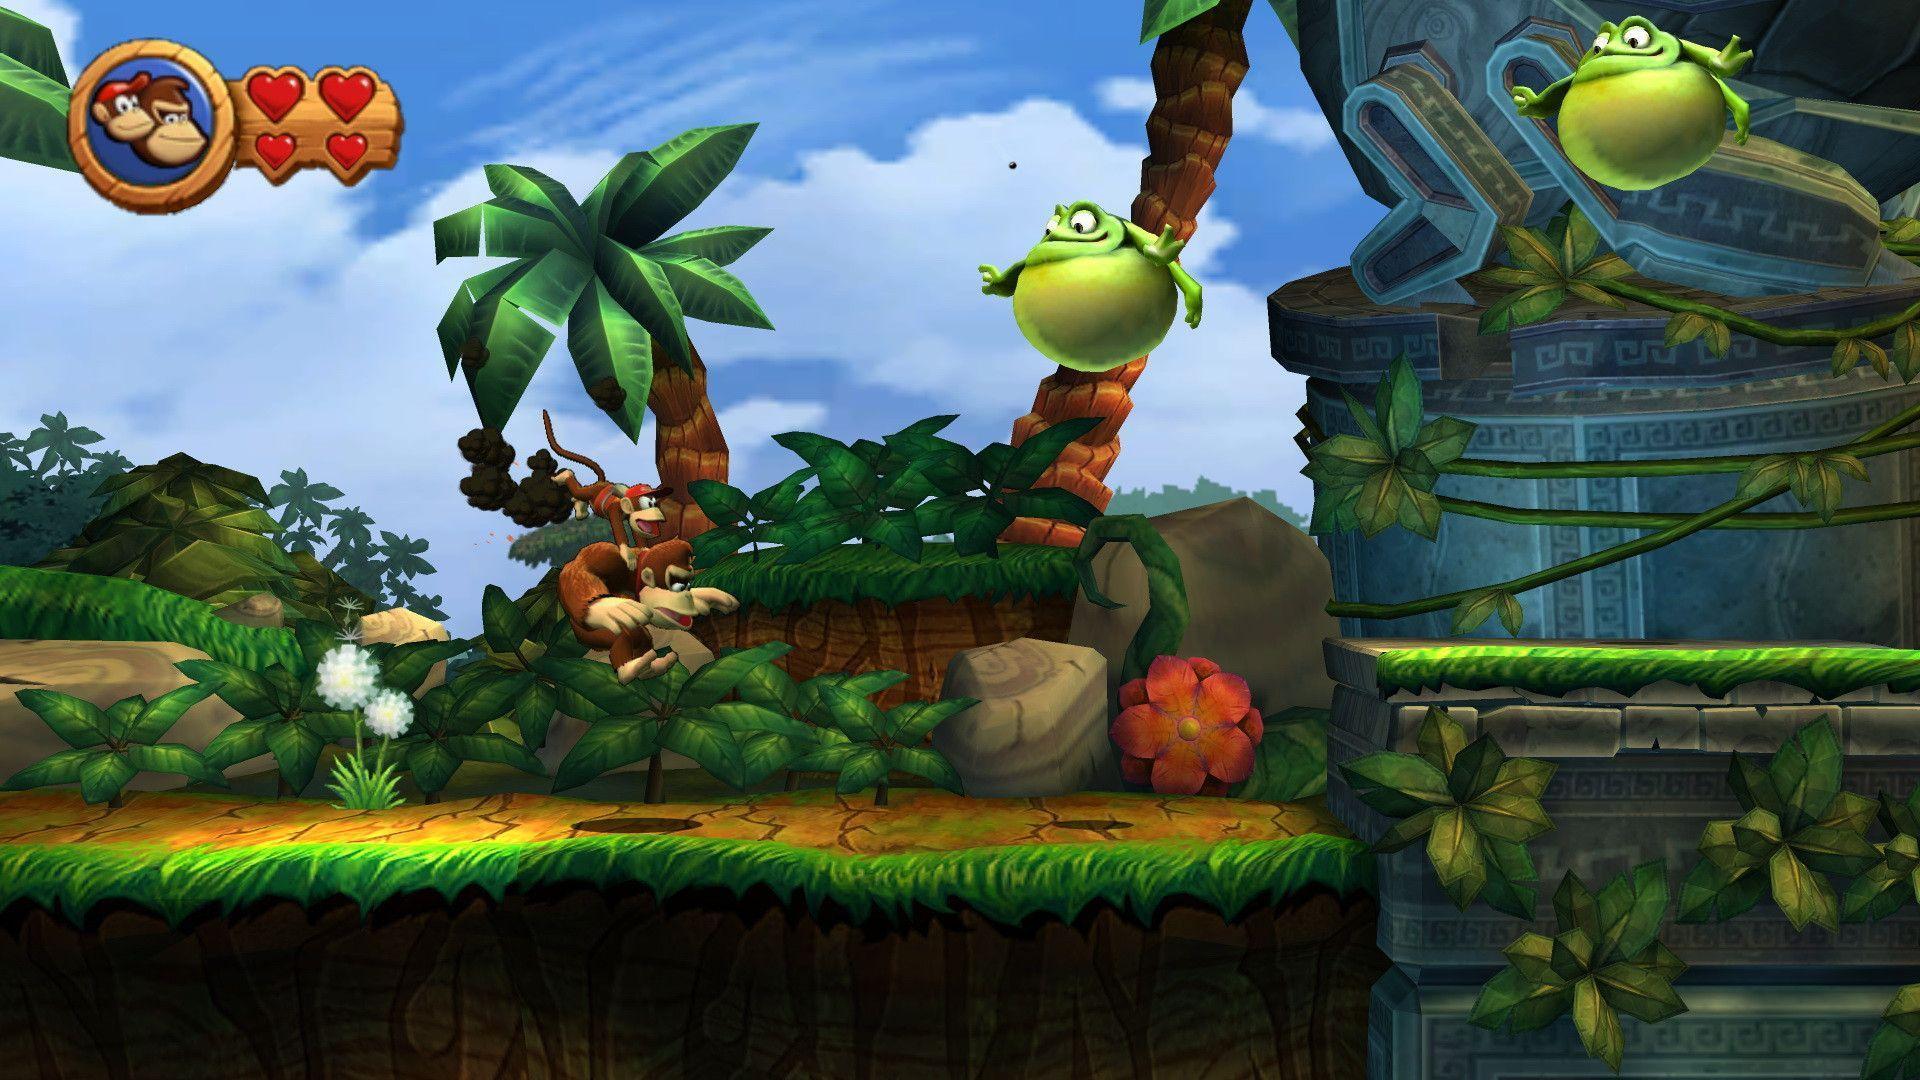 donkey kong country returns